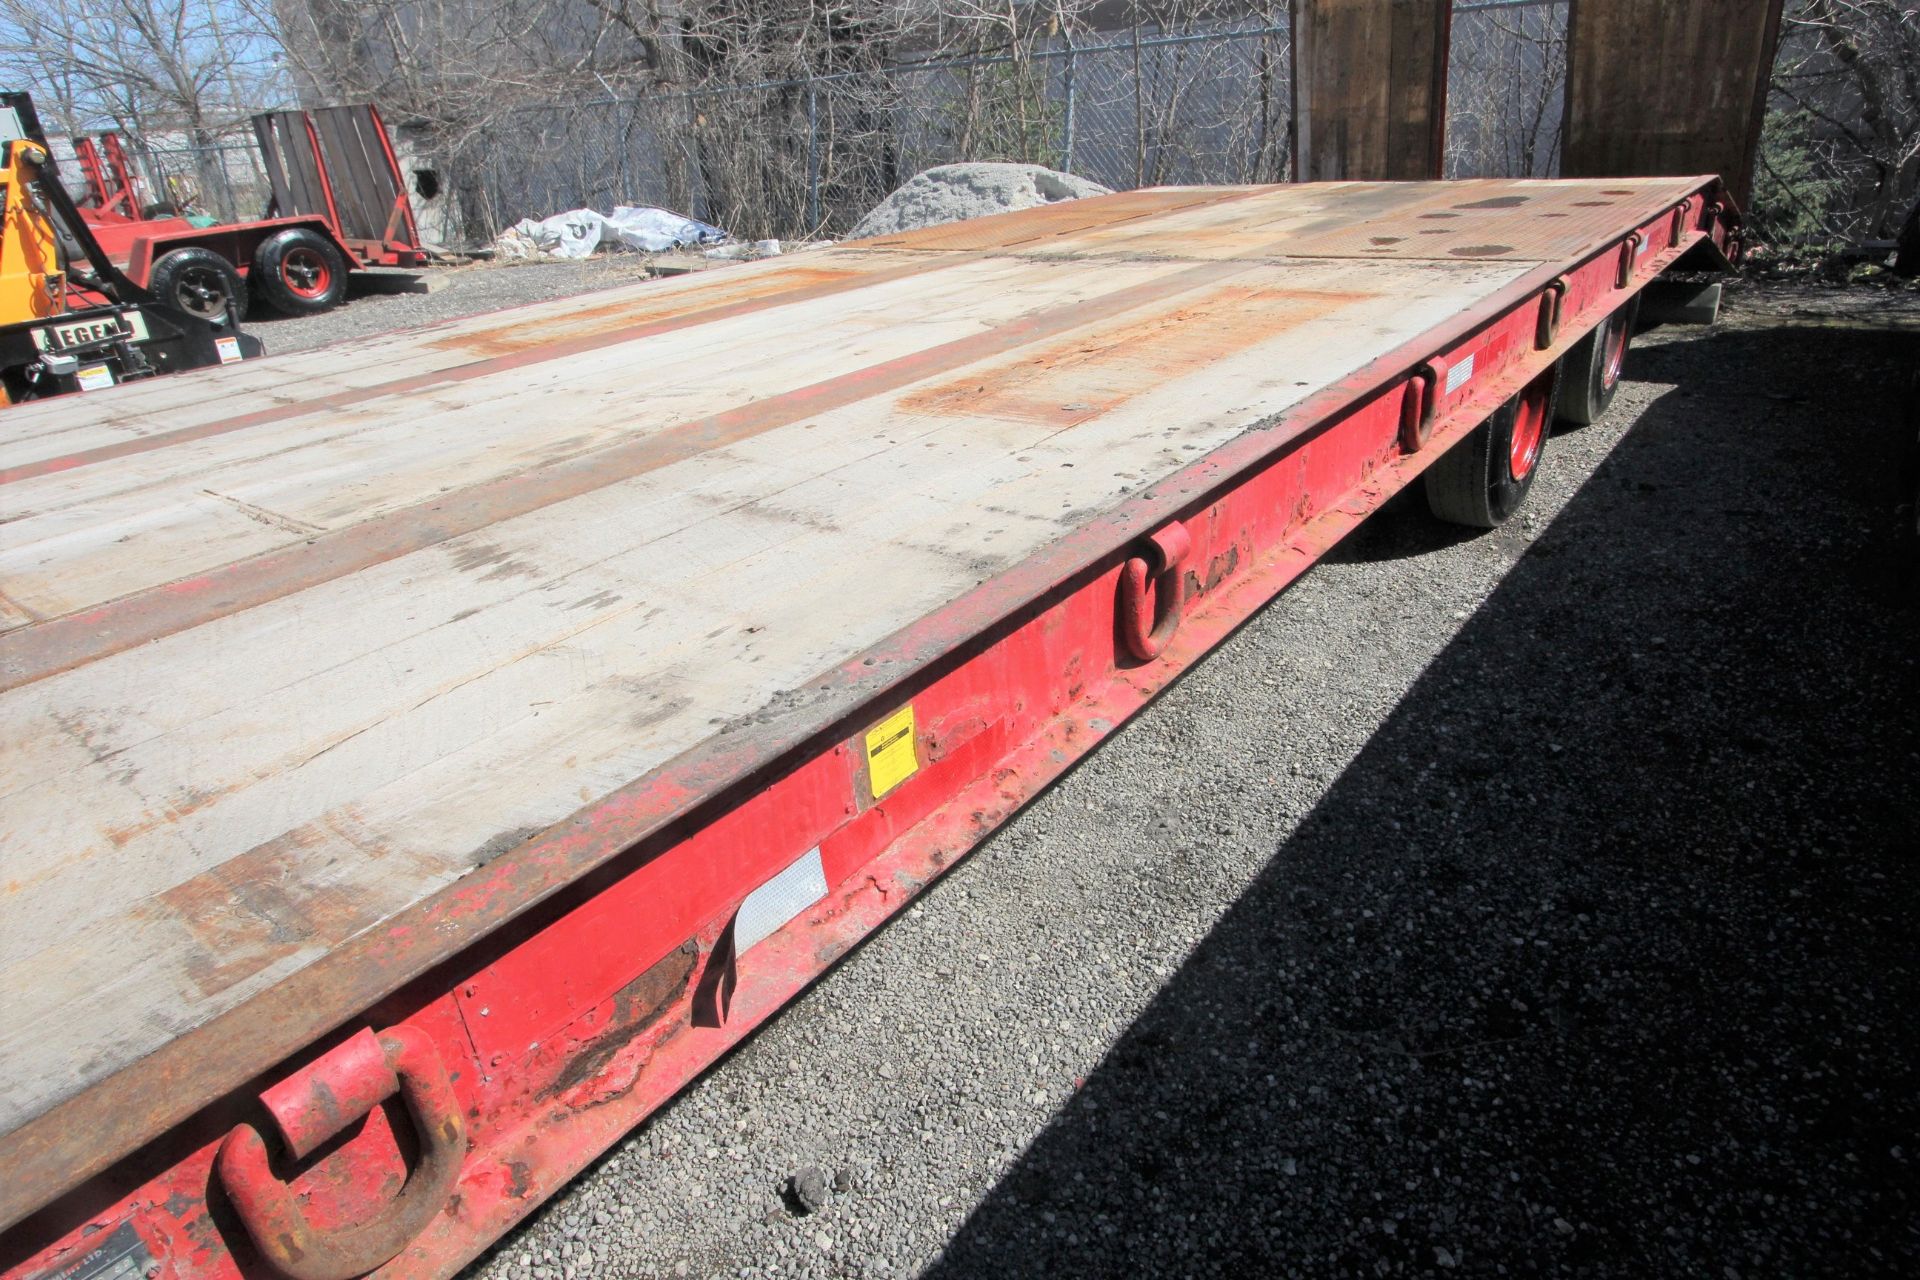 J.C. TRAILERS 26' TANDEM AXLE EQUIPMENT TRAILER, 18,000 LBS. MAX CAPACITY, WOOD DECK, DECK-OVER- - Image 11 of 11